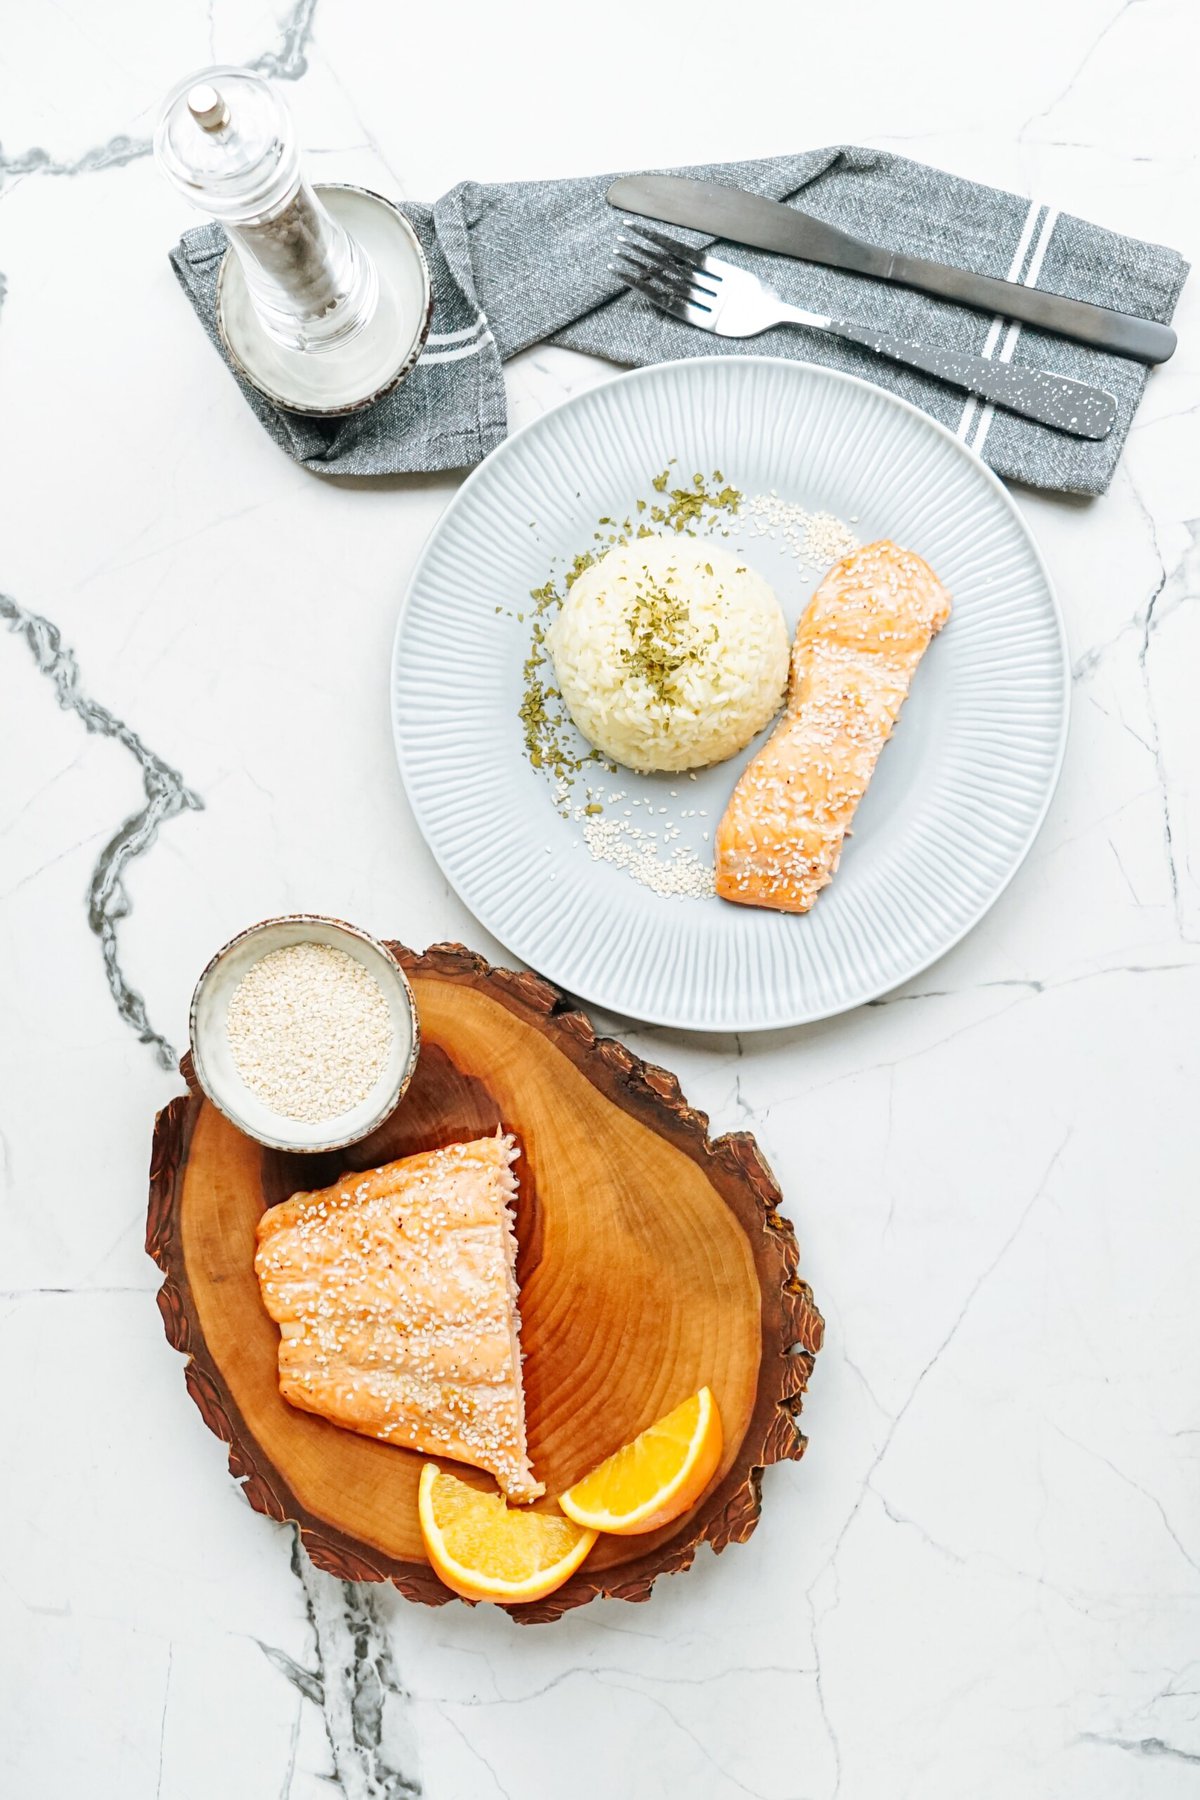 Salmon on a plate with rice and orange slices.